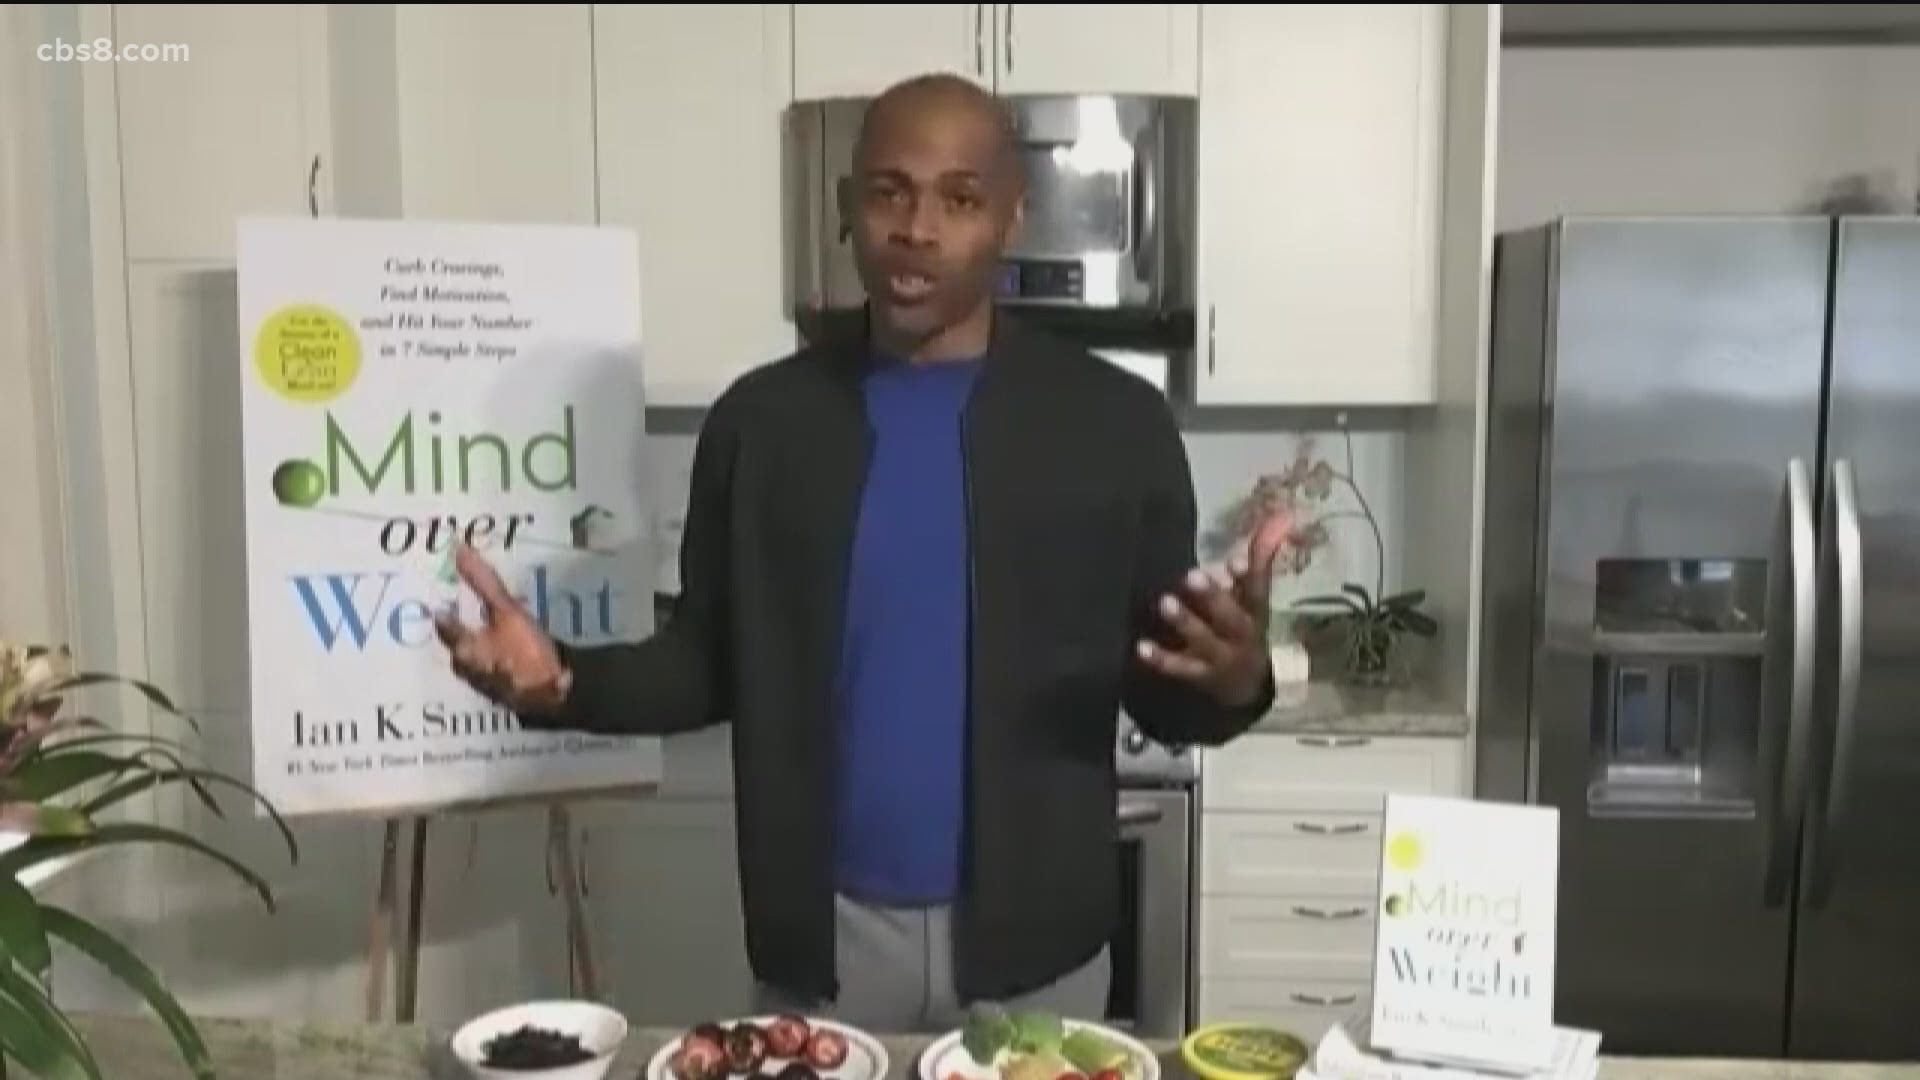 Dr. Ian Smith talks about his book "Mind over Weight" and the steps to try and avoid gaining unwanted weight while inactive at home. @doctoriansmith on instagram